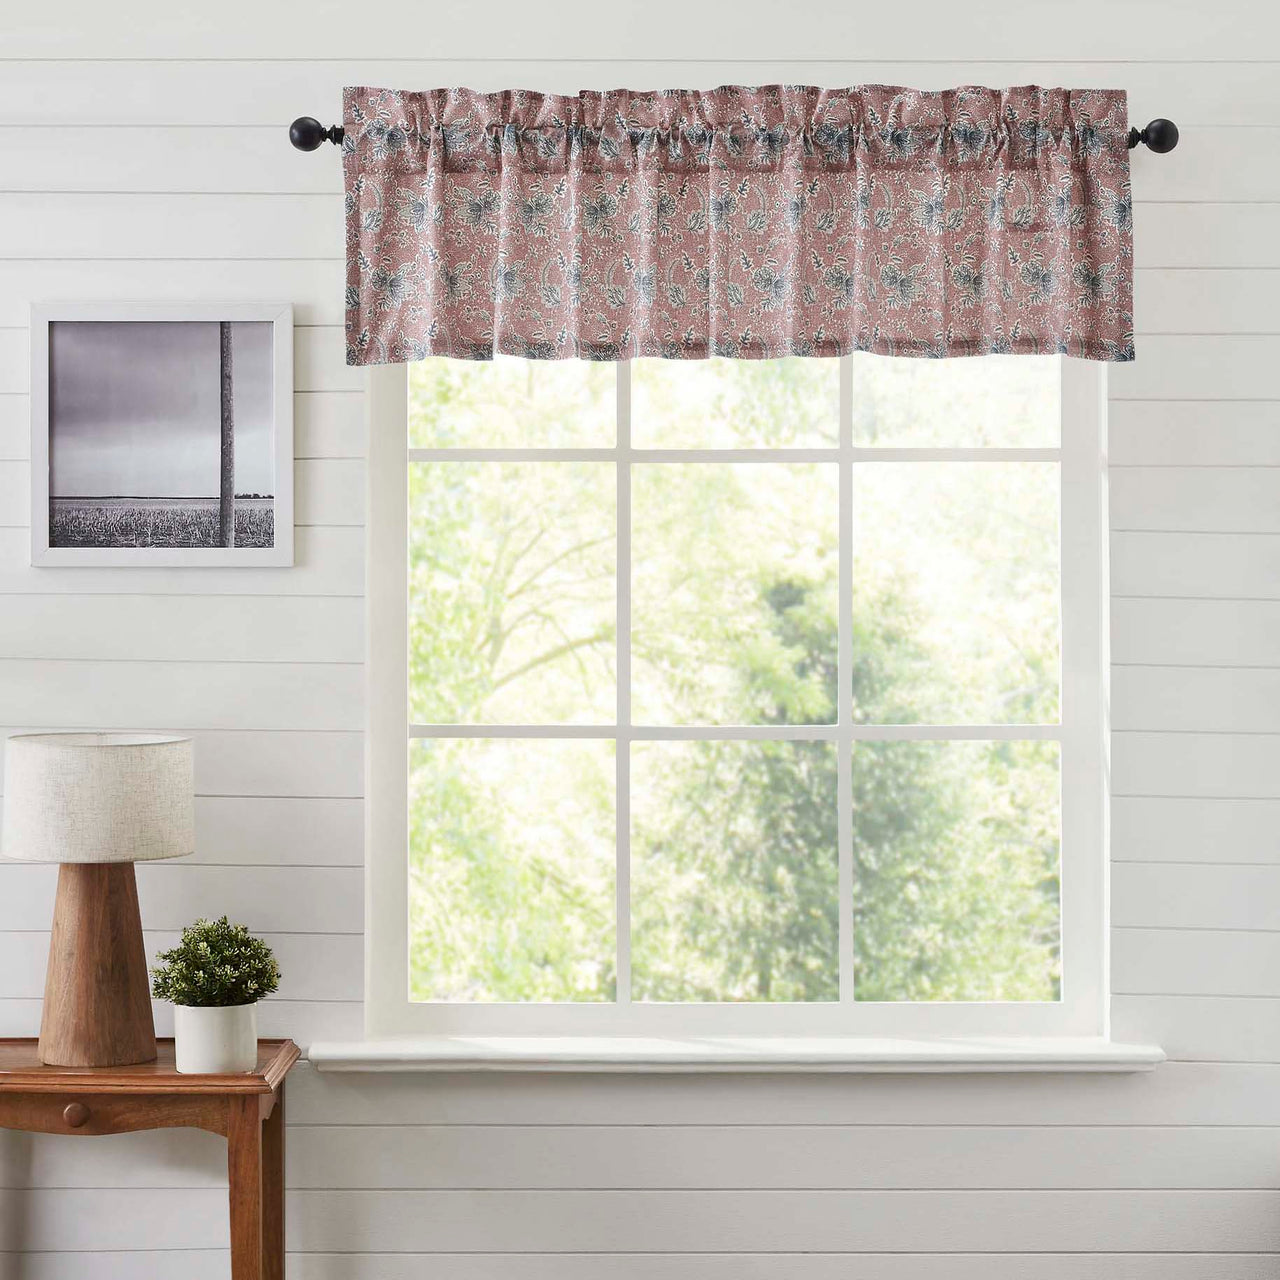 Kaila Floral Valance 16x72 VHC Brands